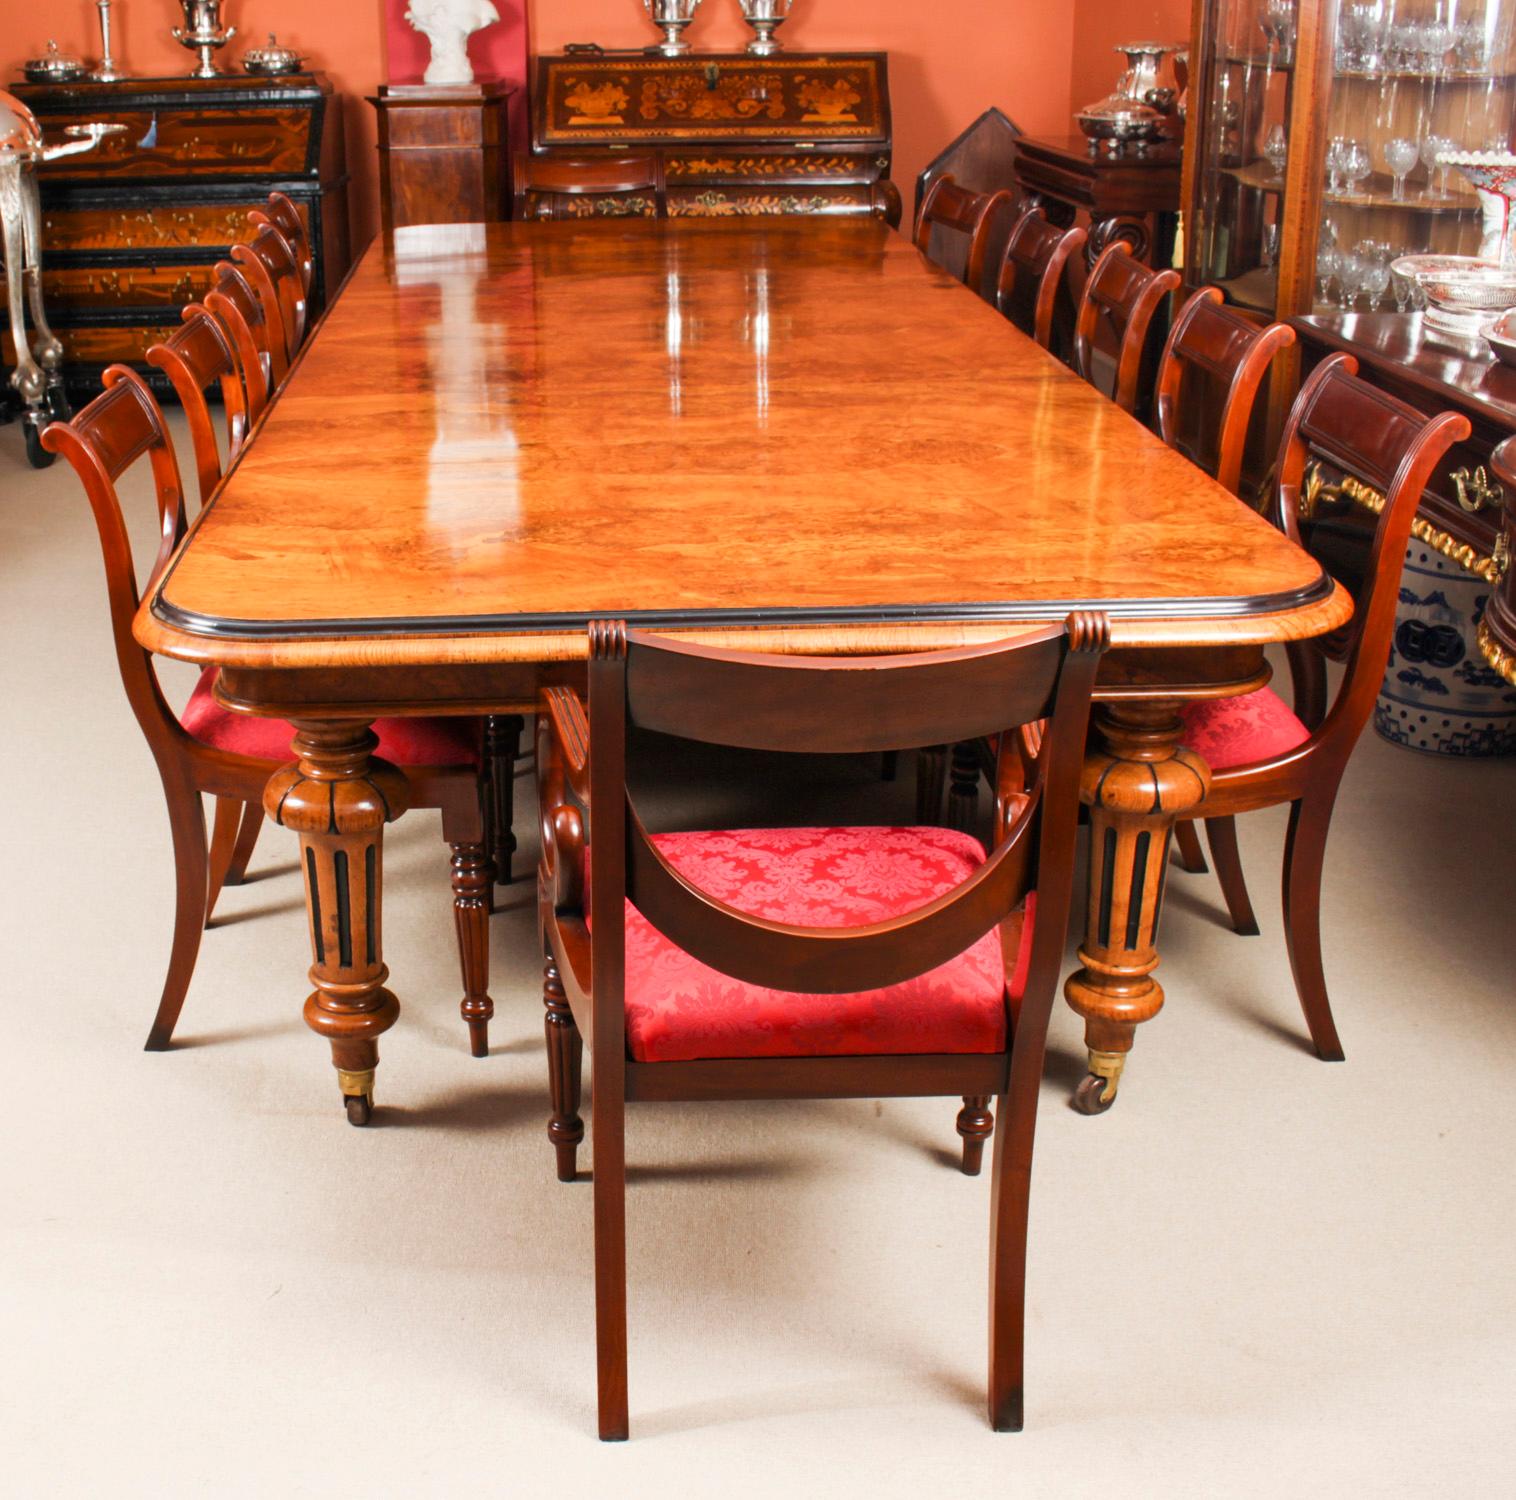 There is no mistaking the style and sophisticated design of this exquisite dining set comprising a rare English antique Victorian pollard oak extending dining table, circa 1860 in date and a set of twelve vintage dining chairs. 
The styles that